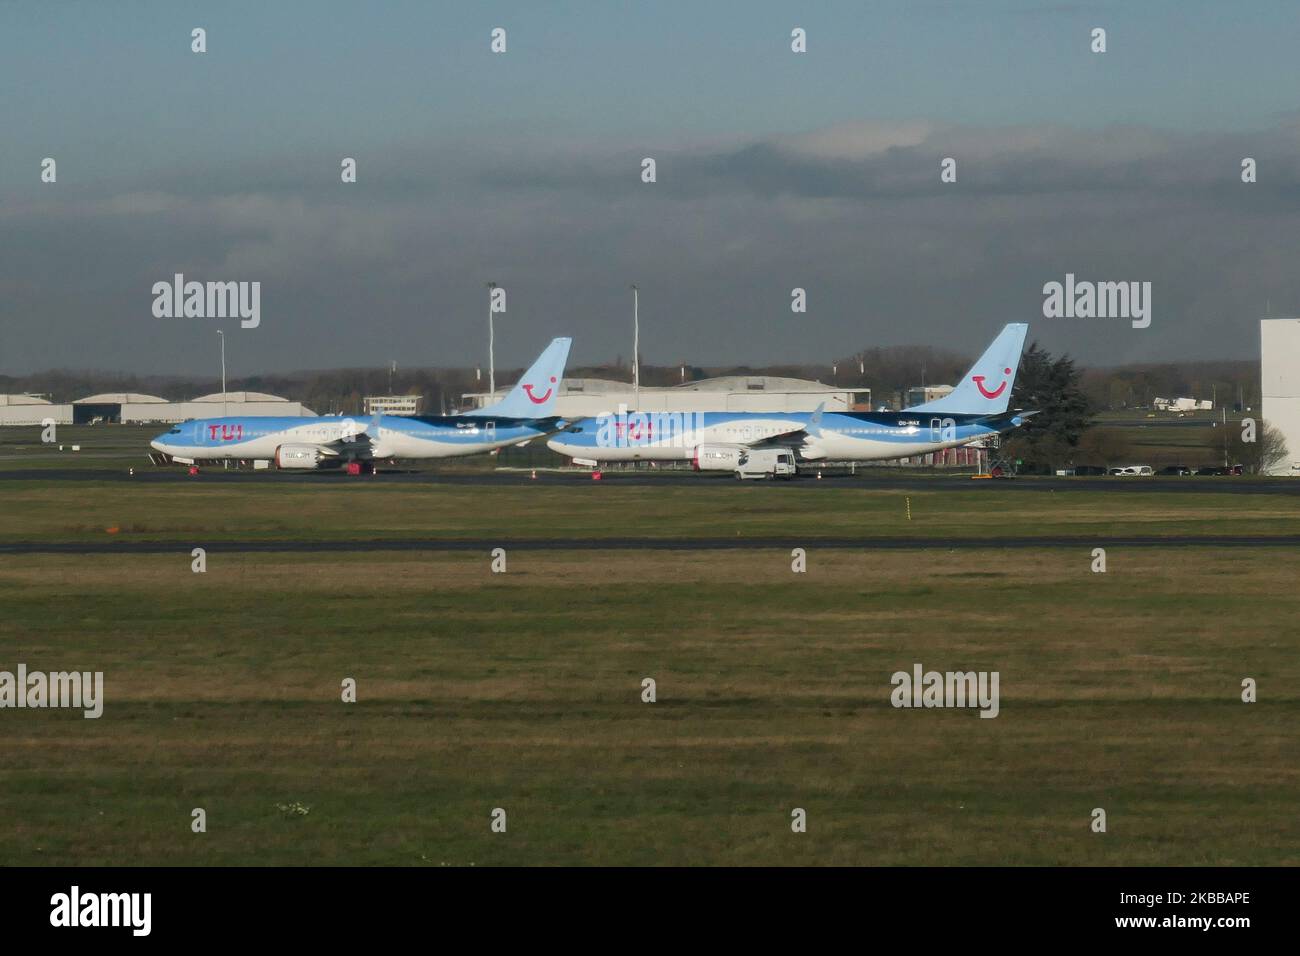 Batch of TUI fly Belgium or TUI Airways Boeing 737 MAX 8 airplanes grounded at Brussels National Airport Zaventem BRU EBBR in Belgium. The planes are parked with wheels and engines covered since March 12, 2019 as the EASA - European Union Aviation Safety Agency suspended all flight operations and FAA of the 737 MAX 8 and 737 MAX 9 with a safety directive because of the MCAS system failure resulting two accidents of the same new aircraft type. TUI fly Belgium is a subsidiary airline of the TUI Group and part of the TUI Airlines. TUI Airways, formerly Thomson Airways BY TOM TOMJET is the largest Stock Photo